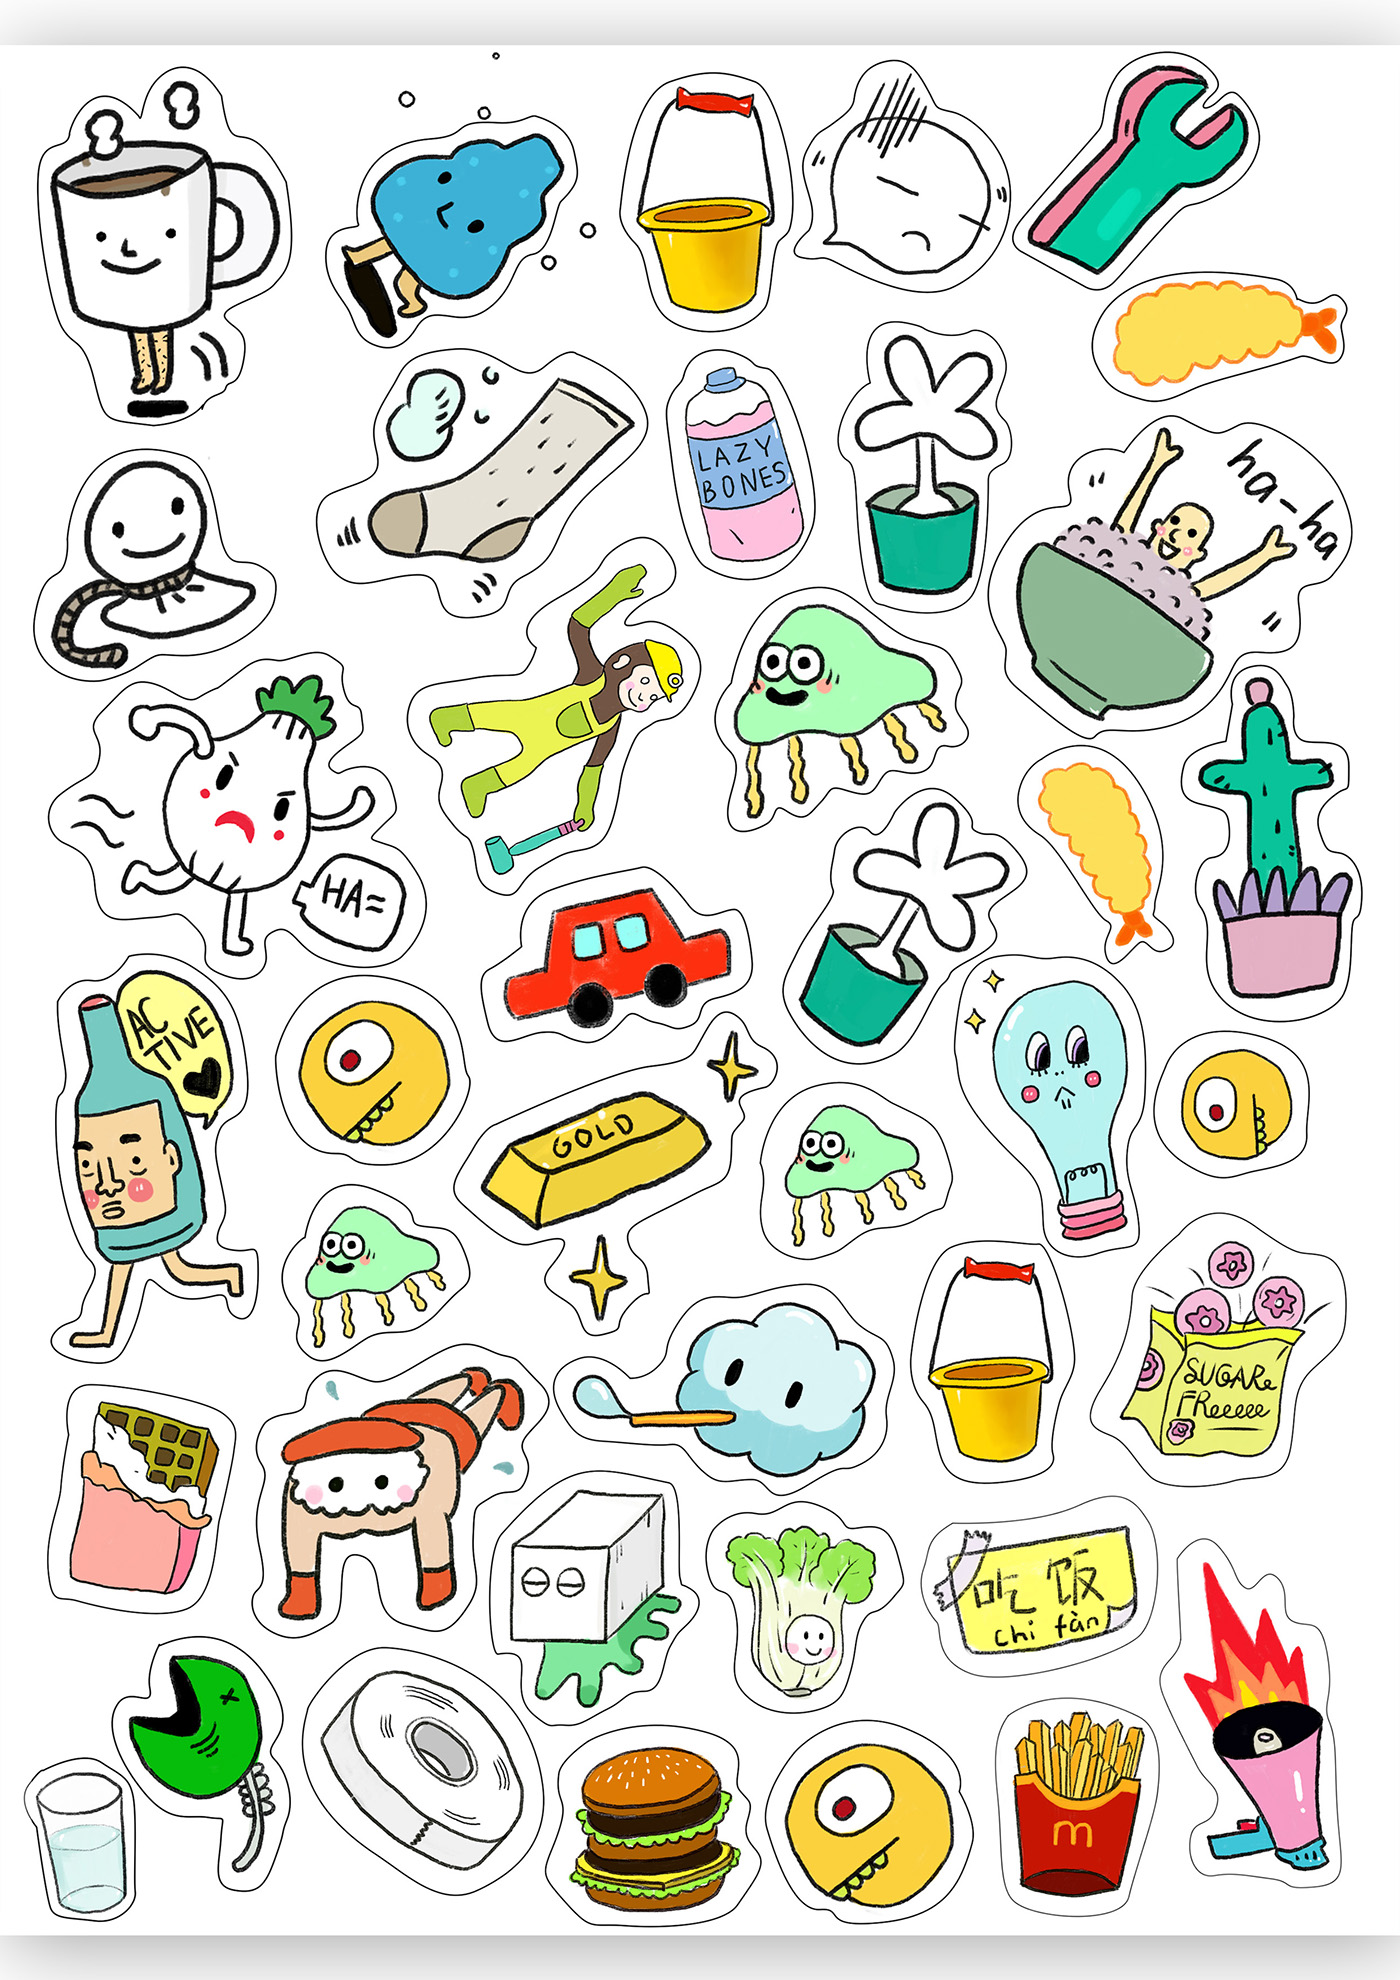 small stickers on Behance